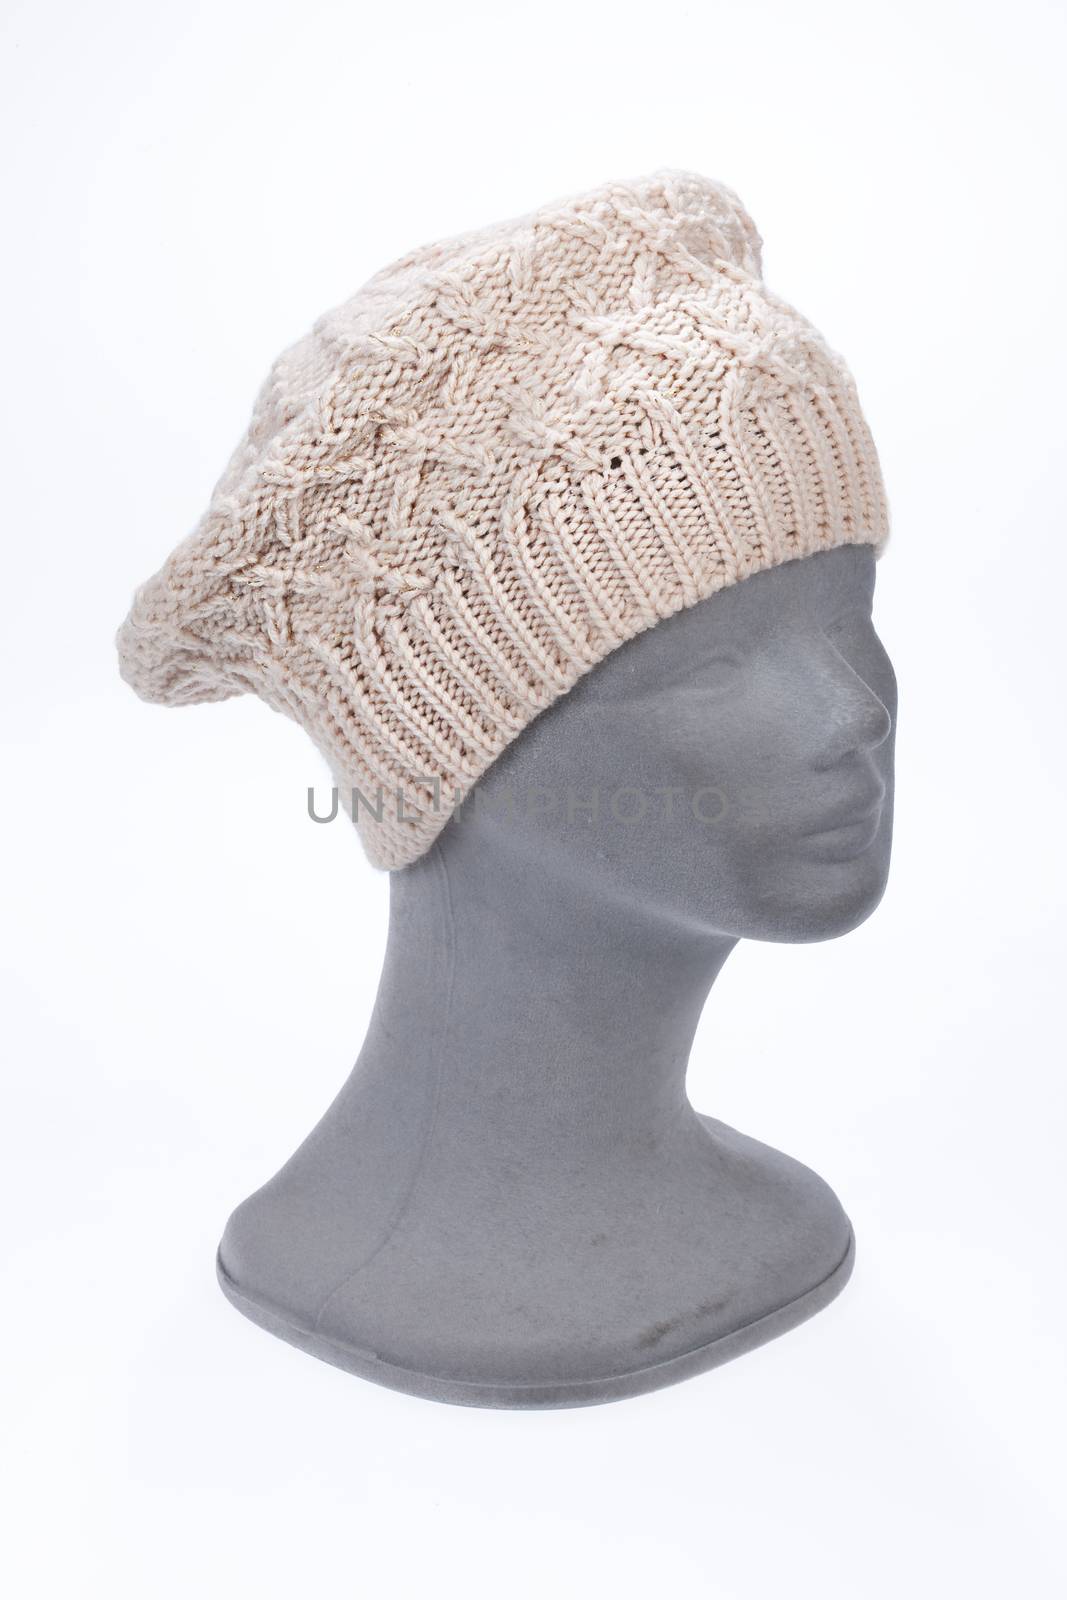 Knitted Hat by Fotoskat